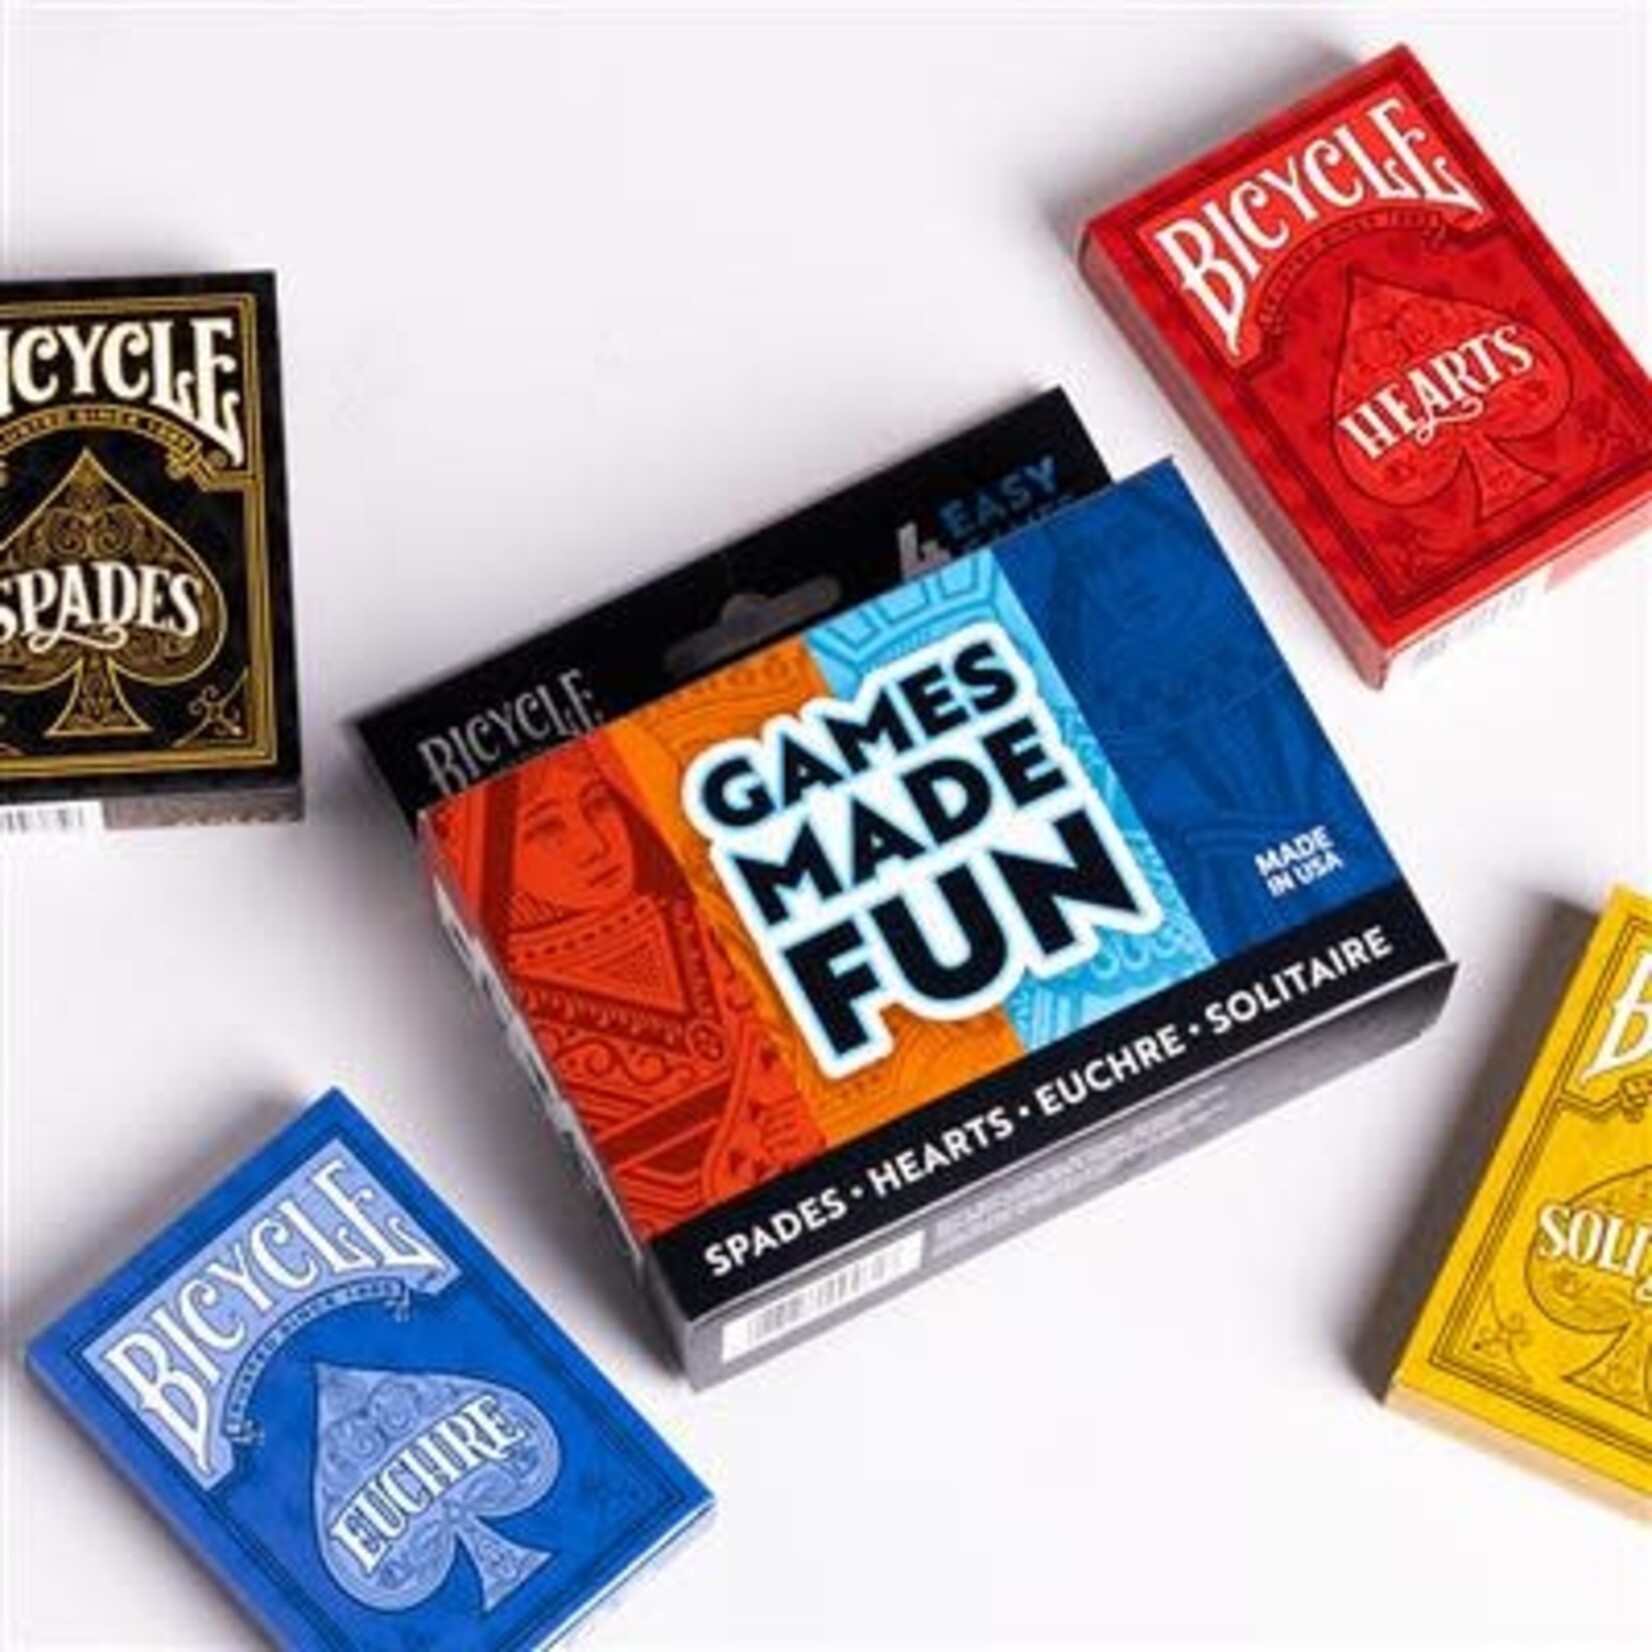 Bicycle Bicycle 4-Game Pack (Hearts, Spades, Euchre, Solitaire)